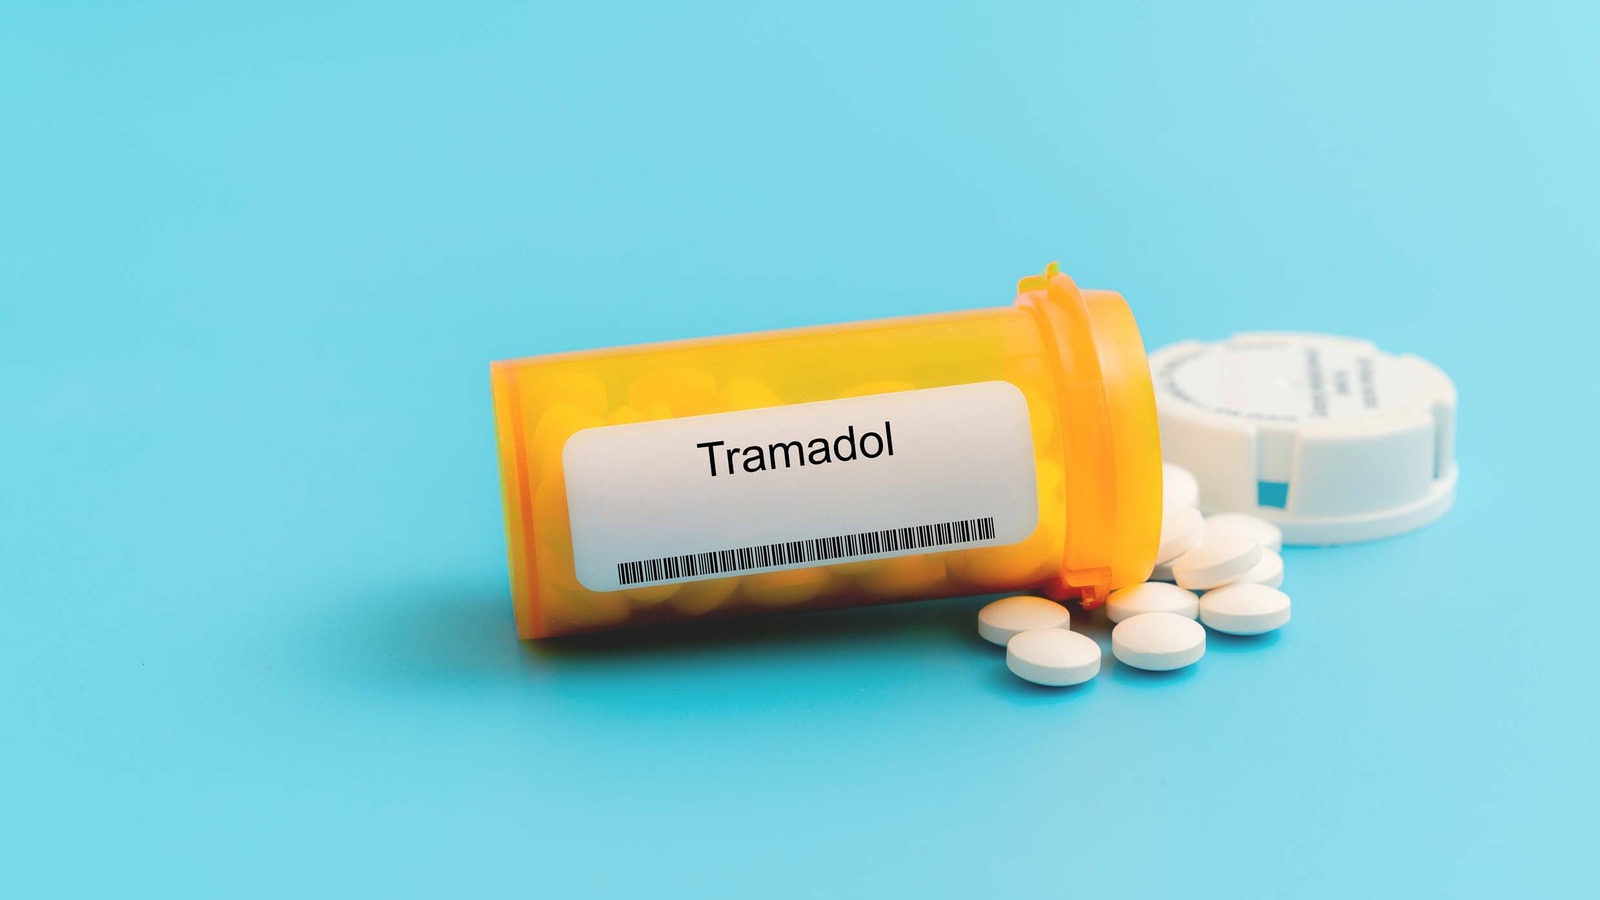 Tablets coming out of tramadol bottle